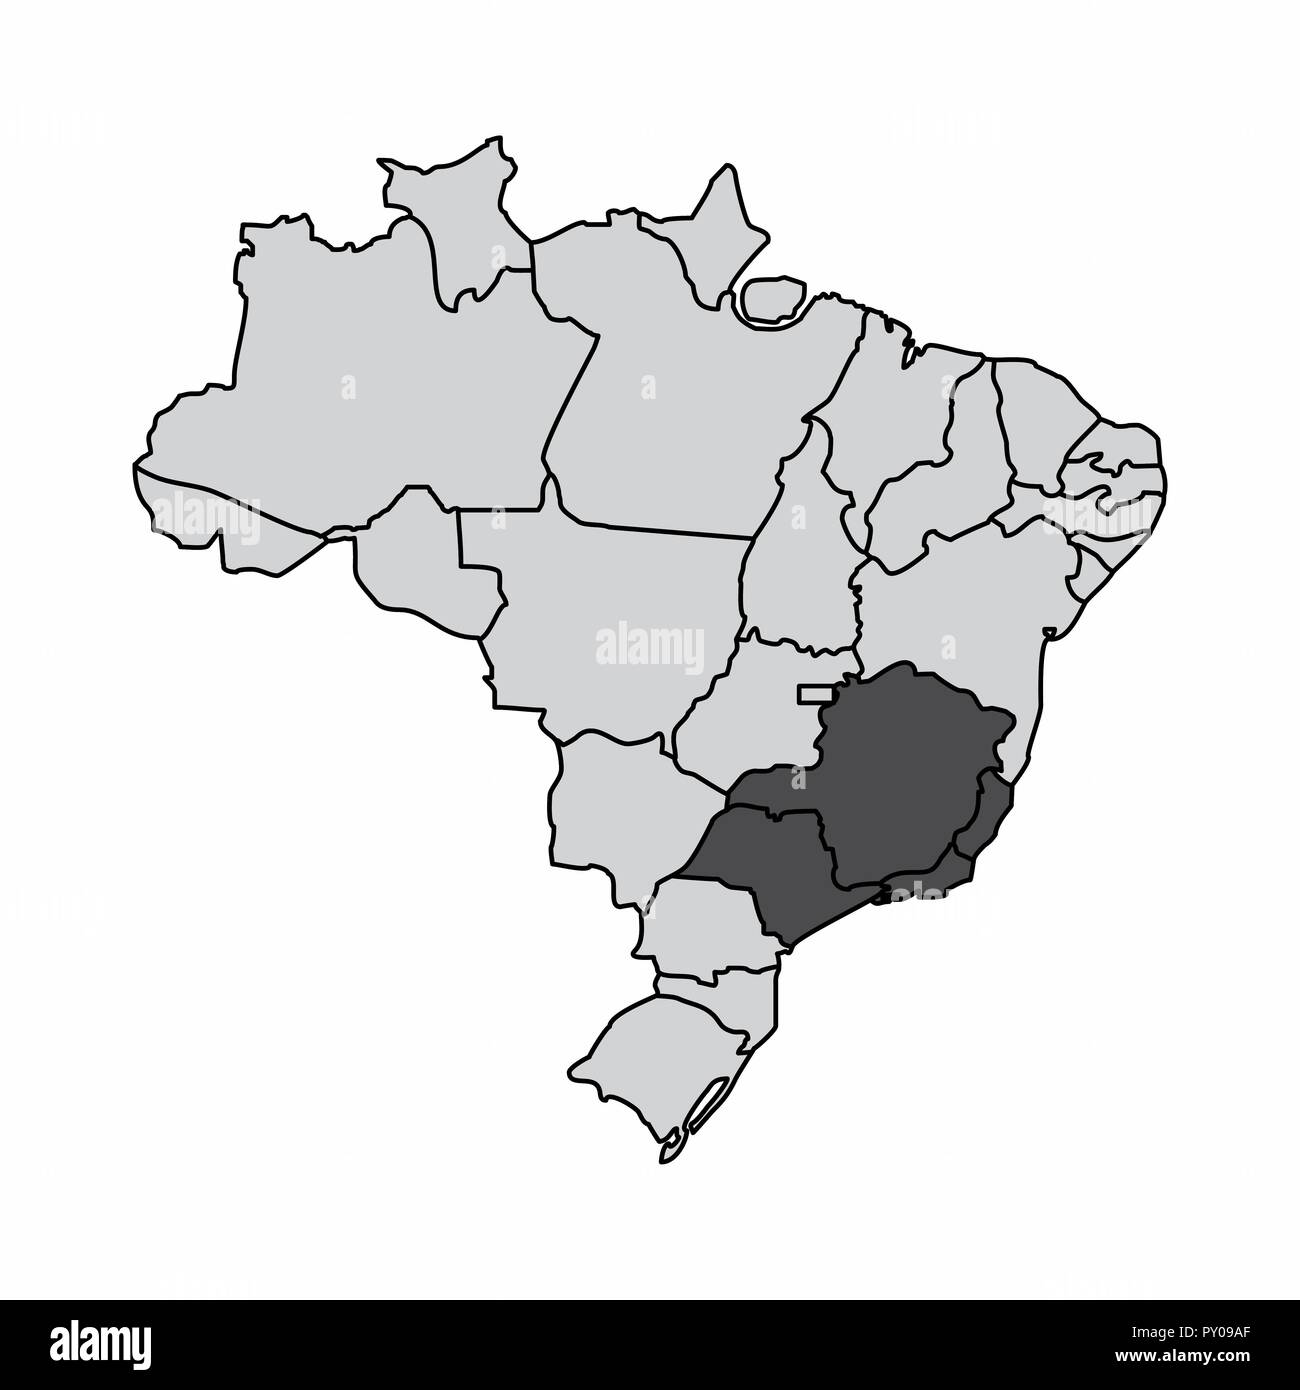 Illustration of a map of Brazil with the southeast region highlighted Stock Vector